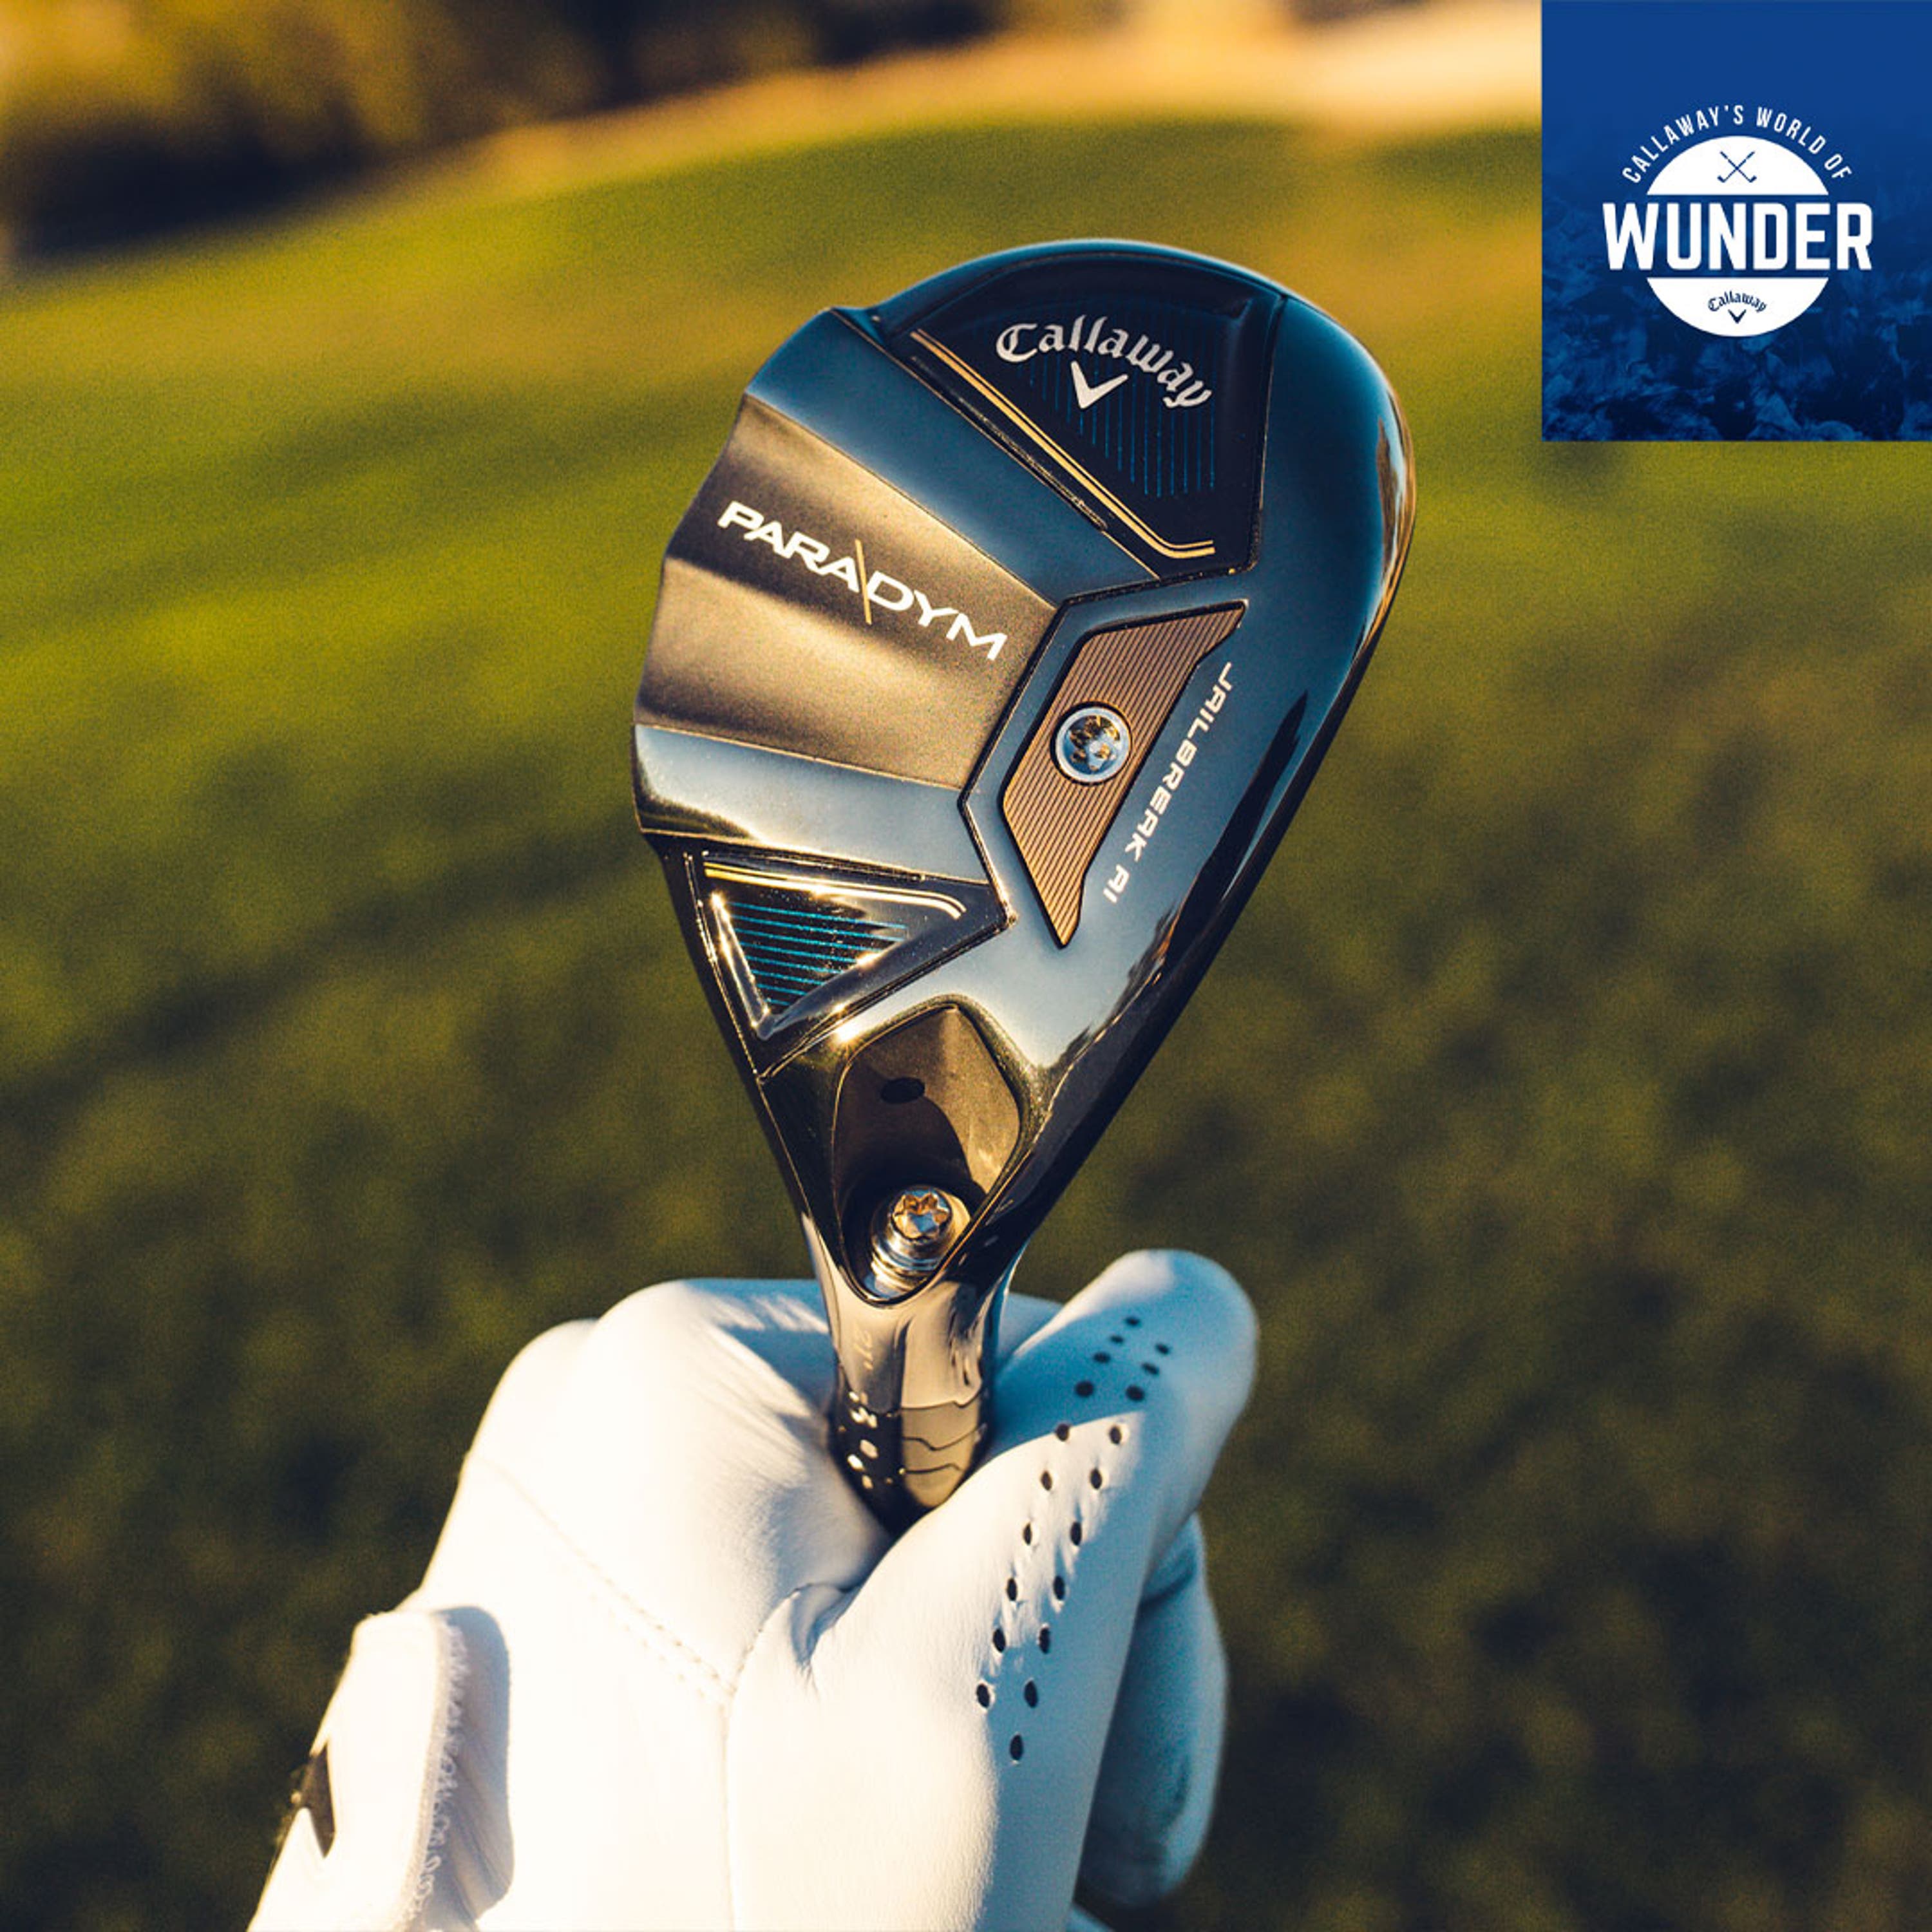 Wunder Puts Callaway Paradym and Paradym X Hybrids to the Test